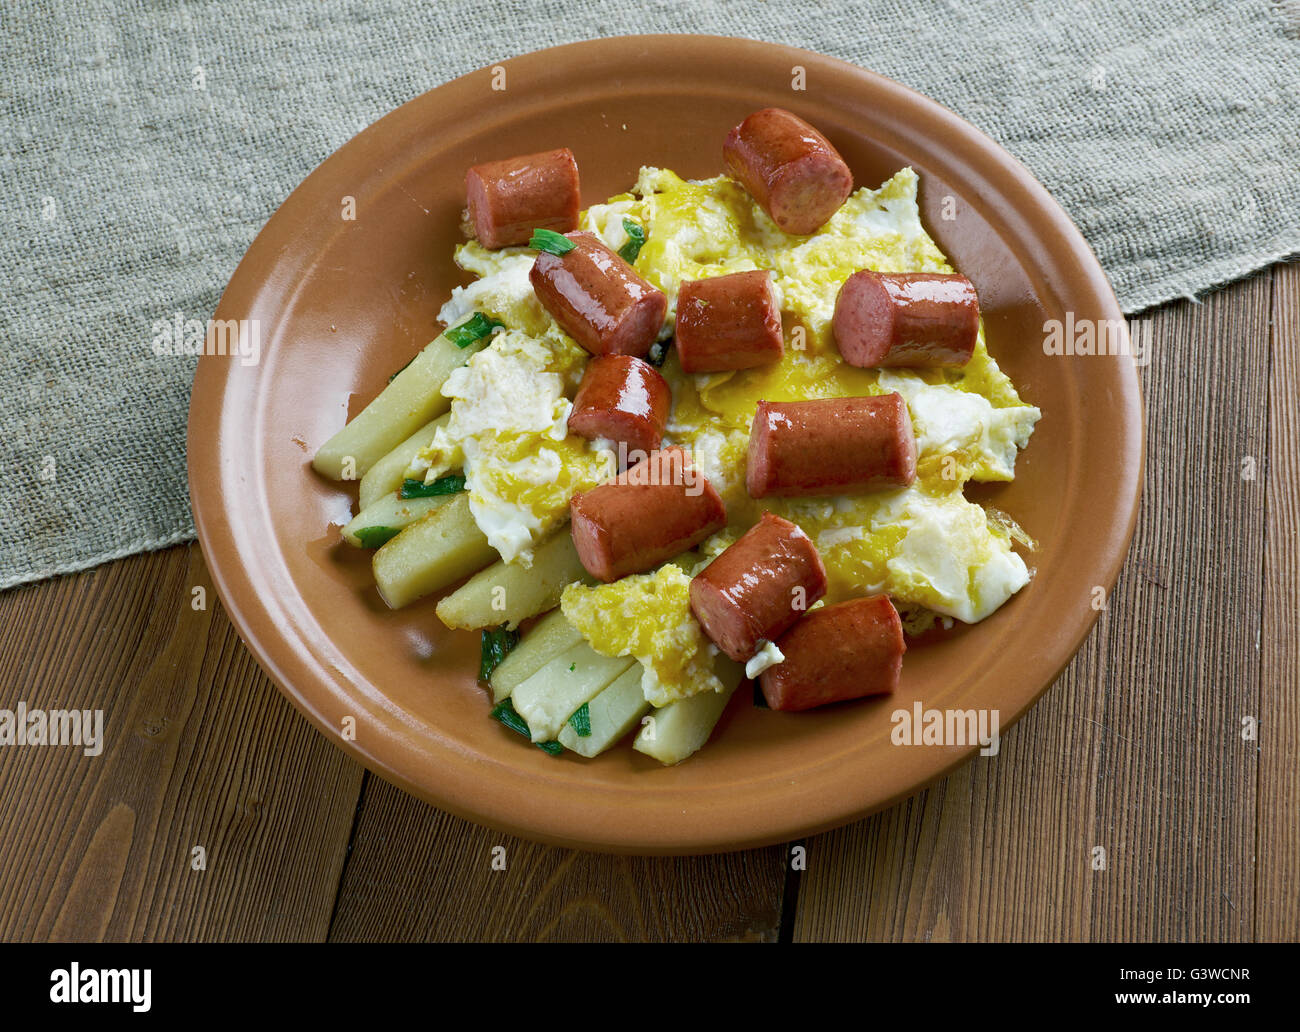 Huevos rotos con chistorra.scrambled eggs with sausage and potatoes. Mexican style. Stock Photo